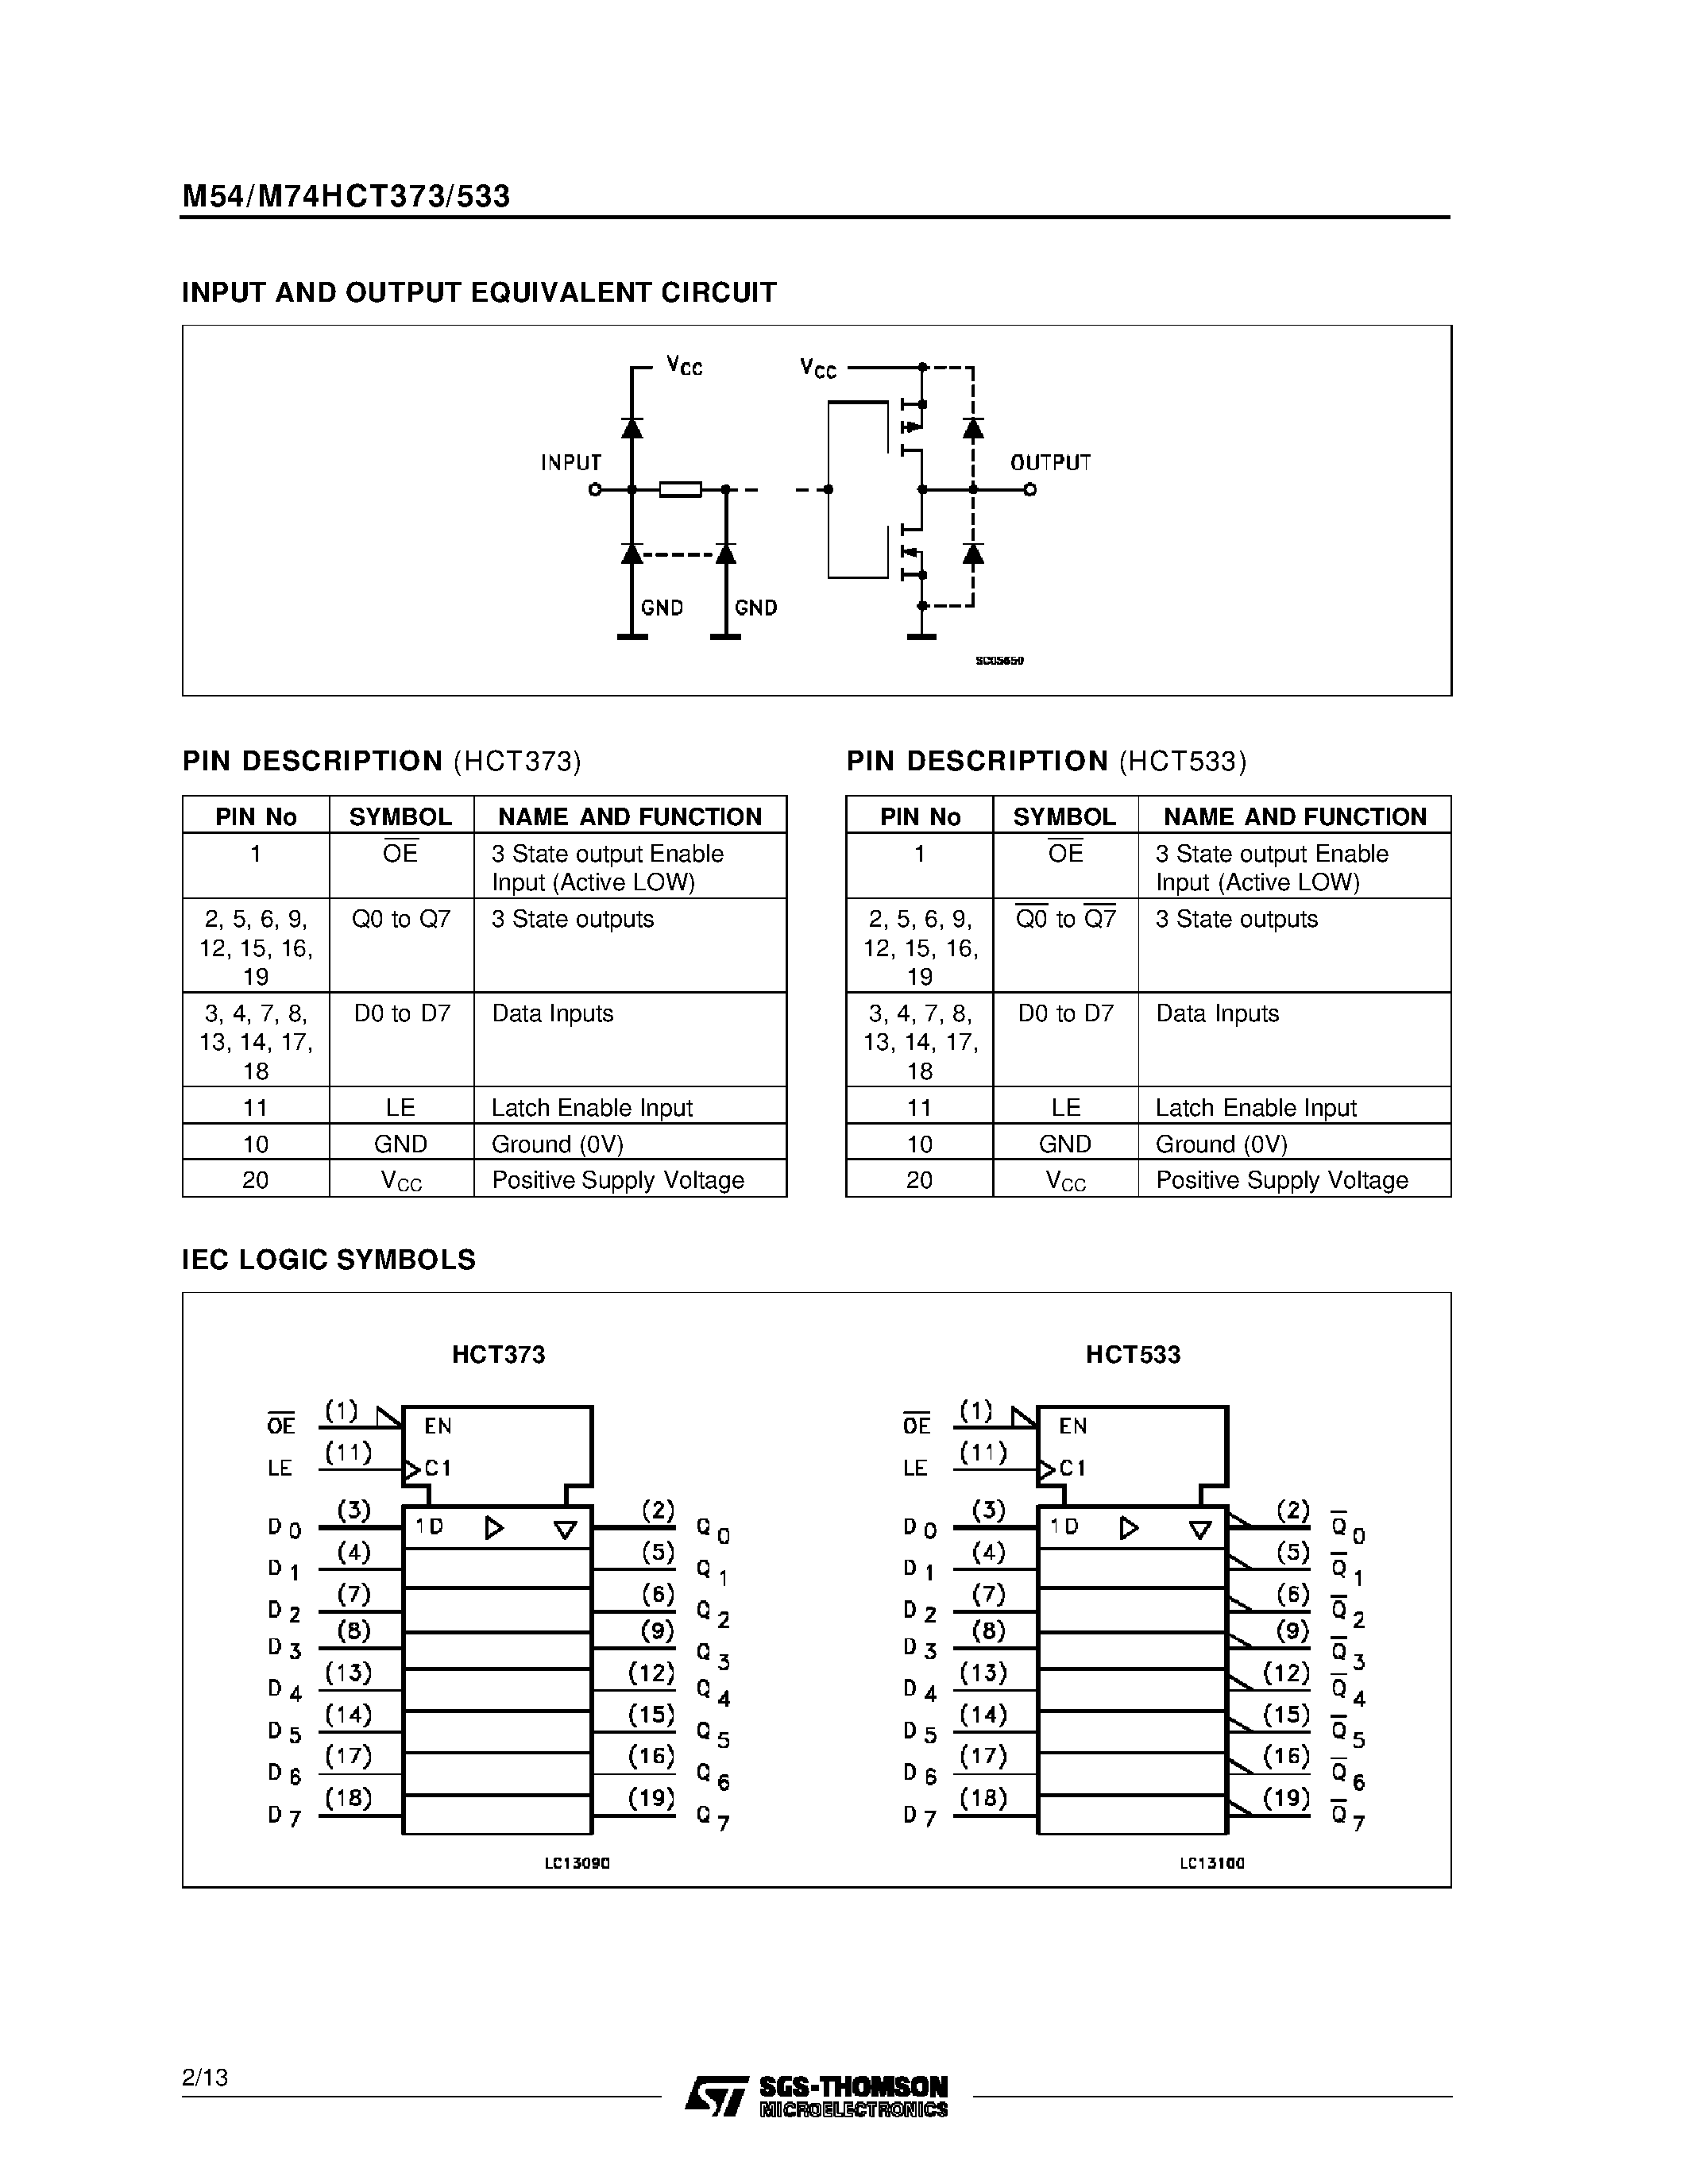 Datasheet M74HCT533 - OCTAL D-TYPE LATCH WITH 3 STATE OUTPUT HCT373 NON INVERTING - HCT533 INVERTING page 2